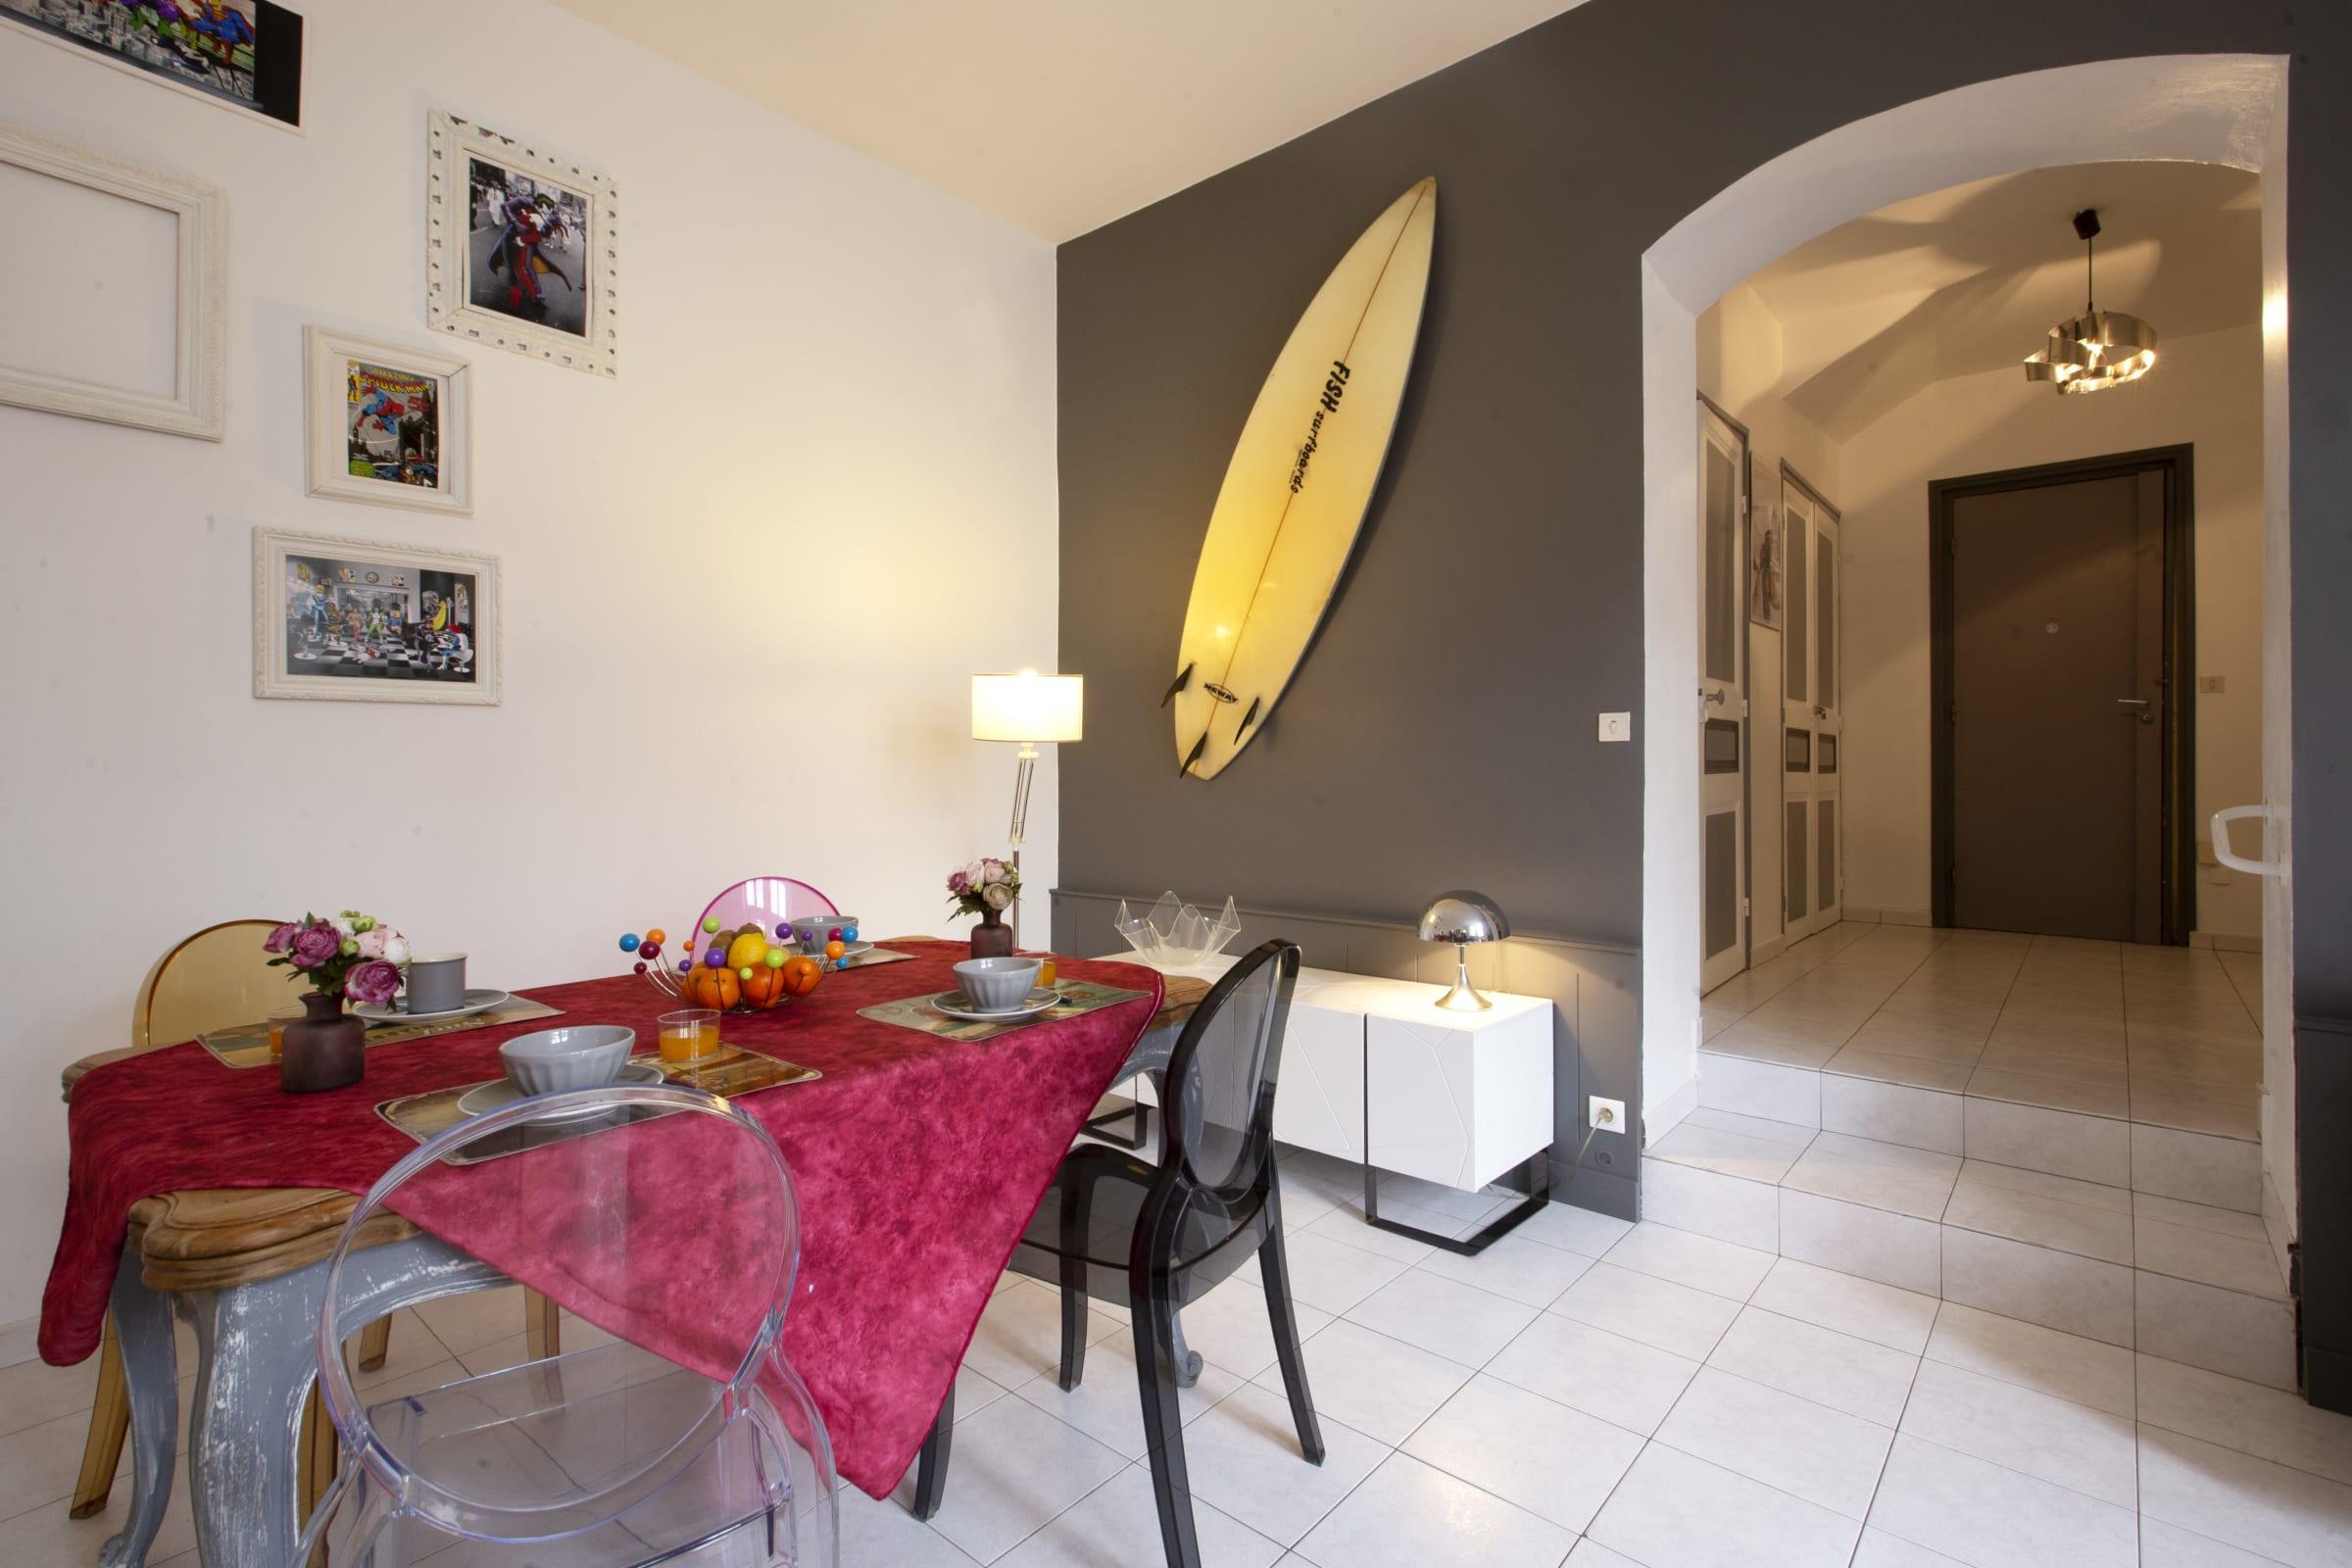 Property Image 2 - Nice and bright flat just nearby central Biarritz